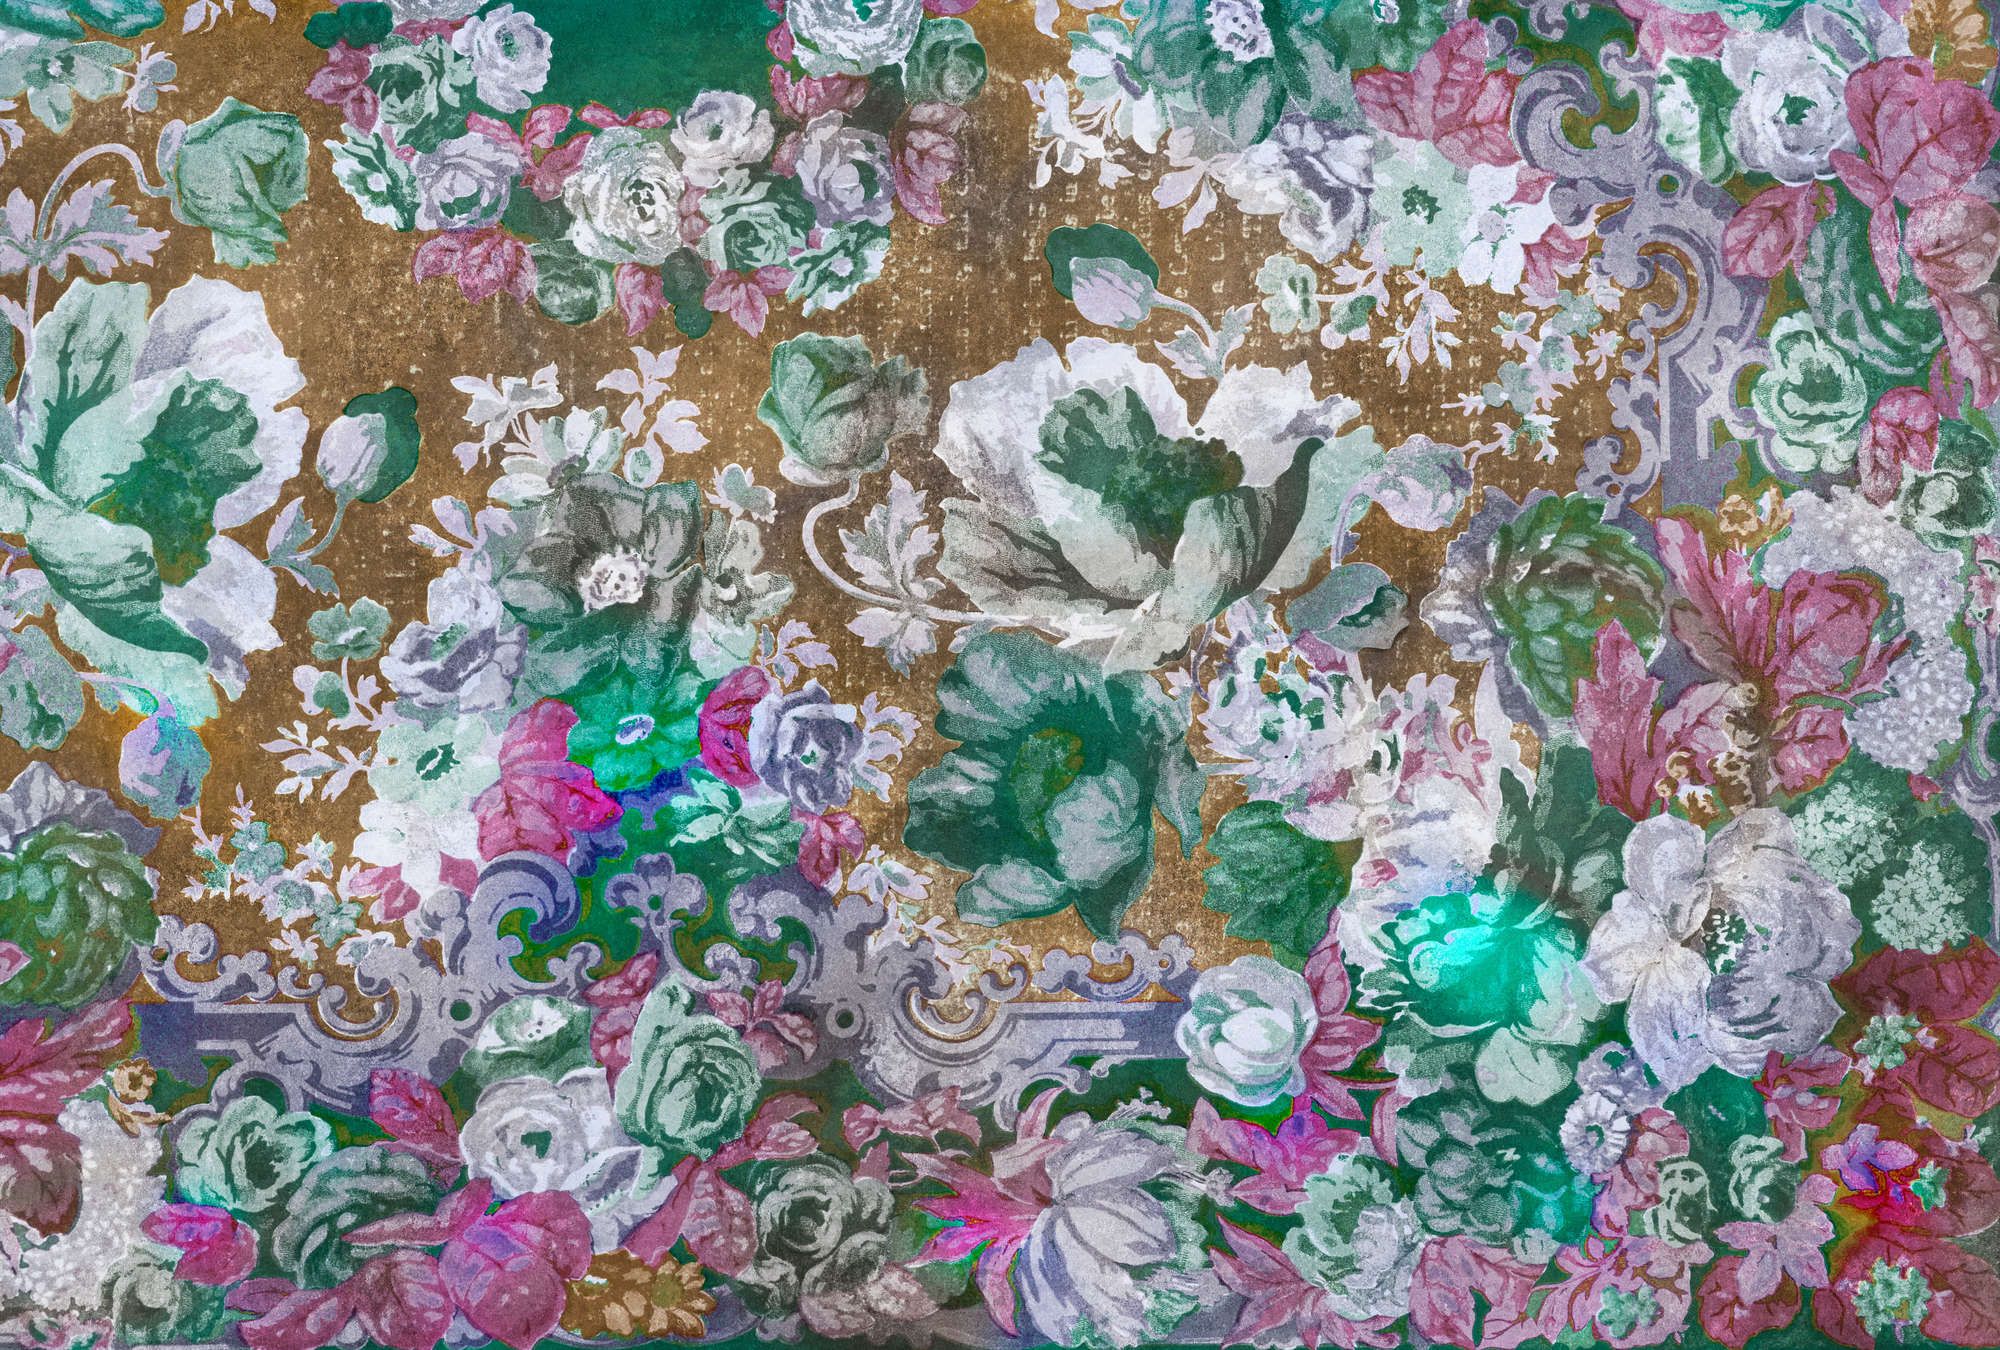             Photo wallpaper »carmente 1« - Classic style floral pattern against a vintage plaster texture - Colourful | Smooth, slightly shiny premium non-woven fabric
        